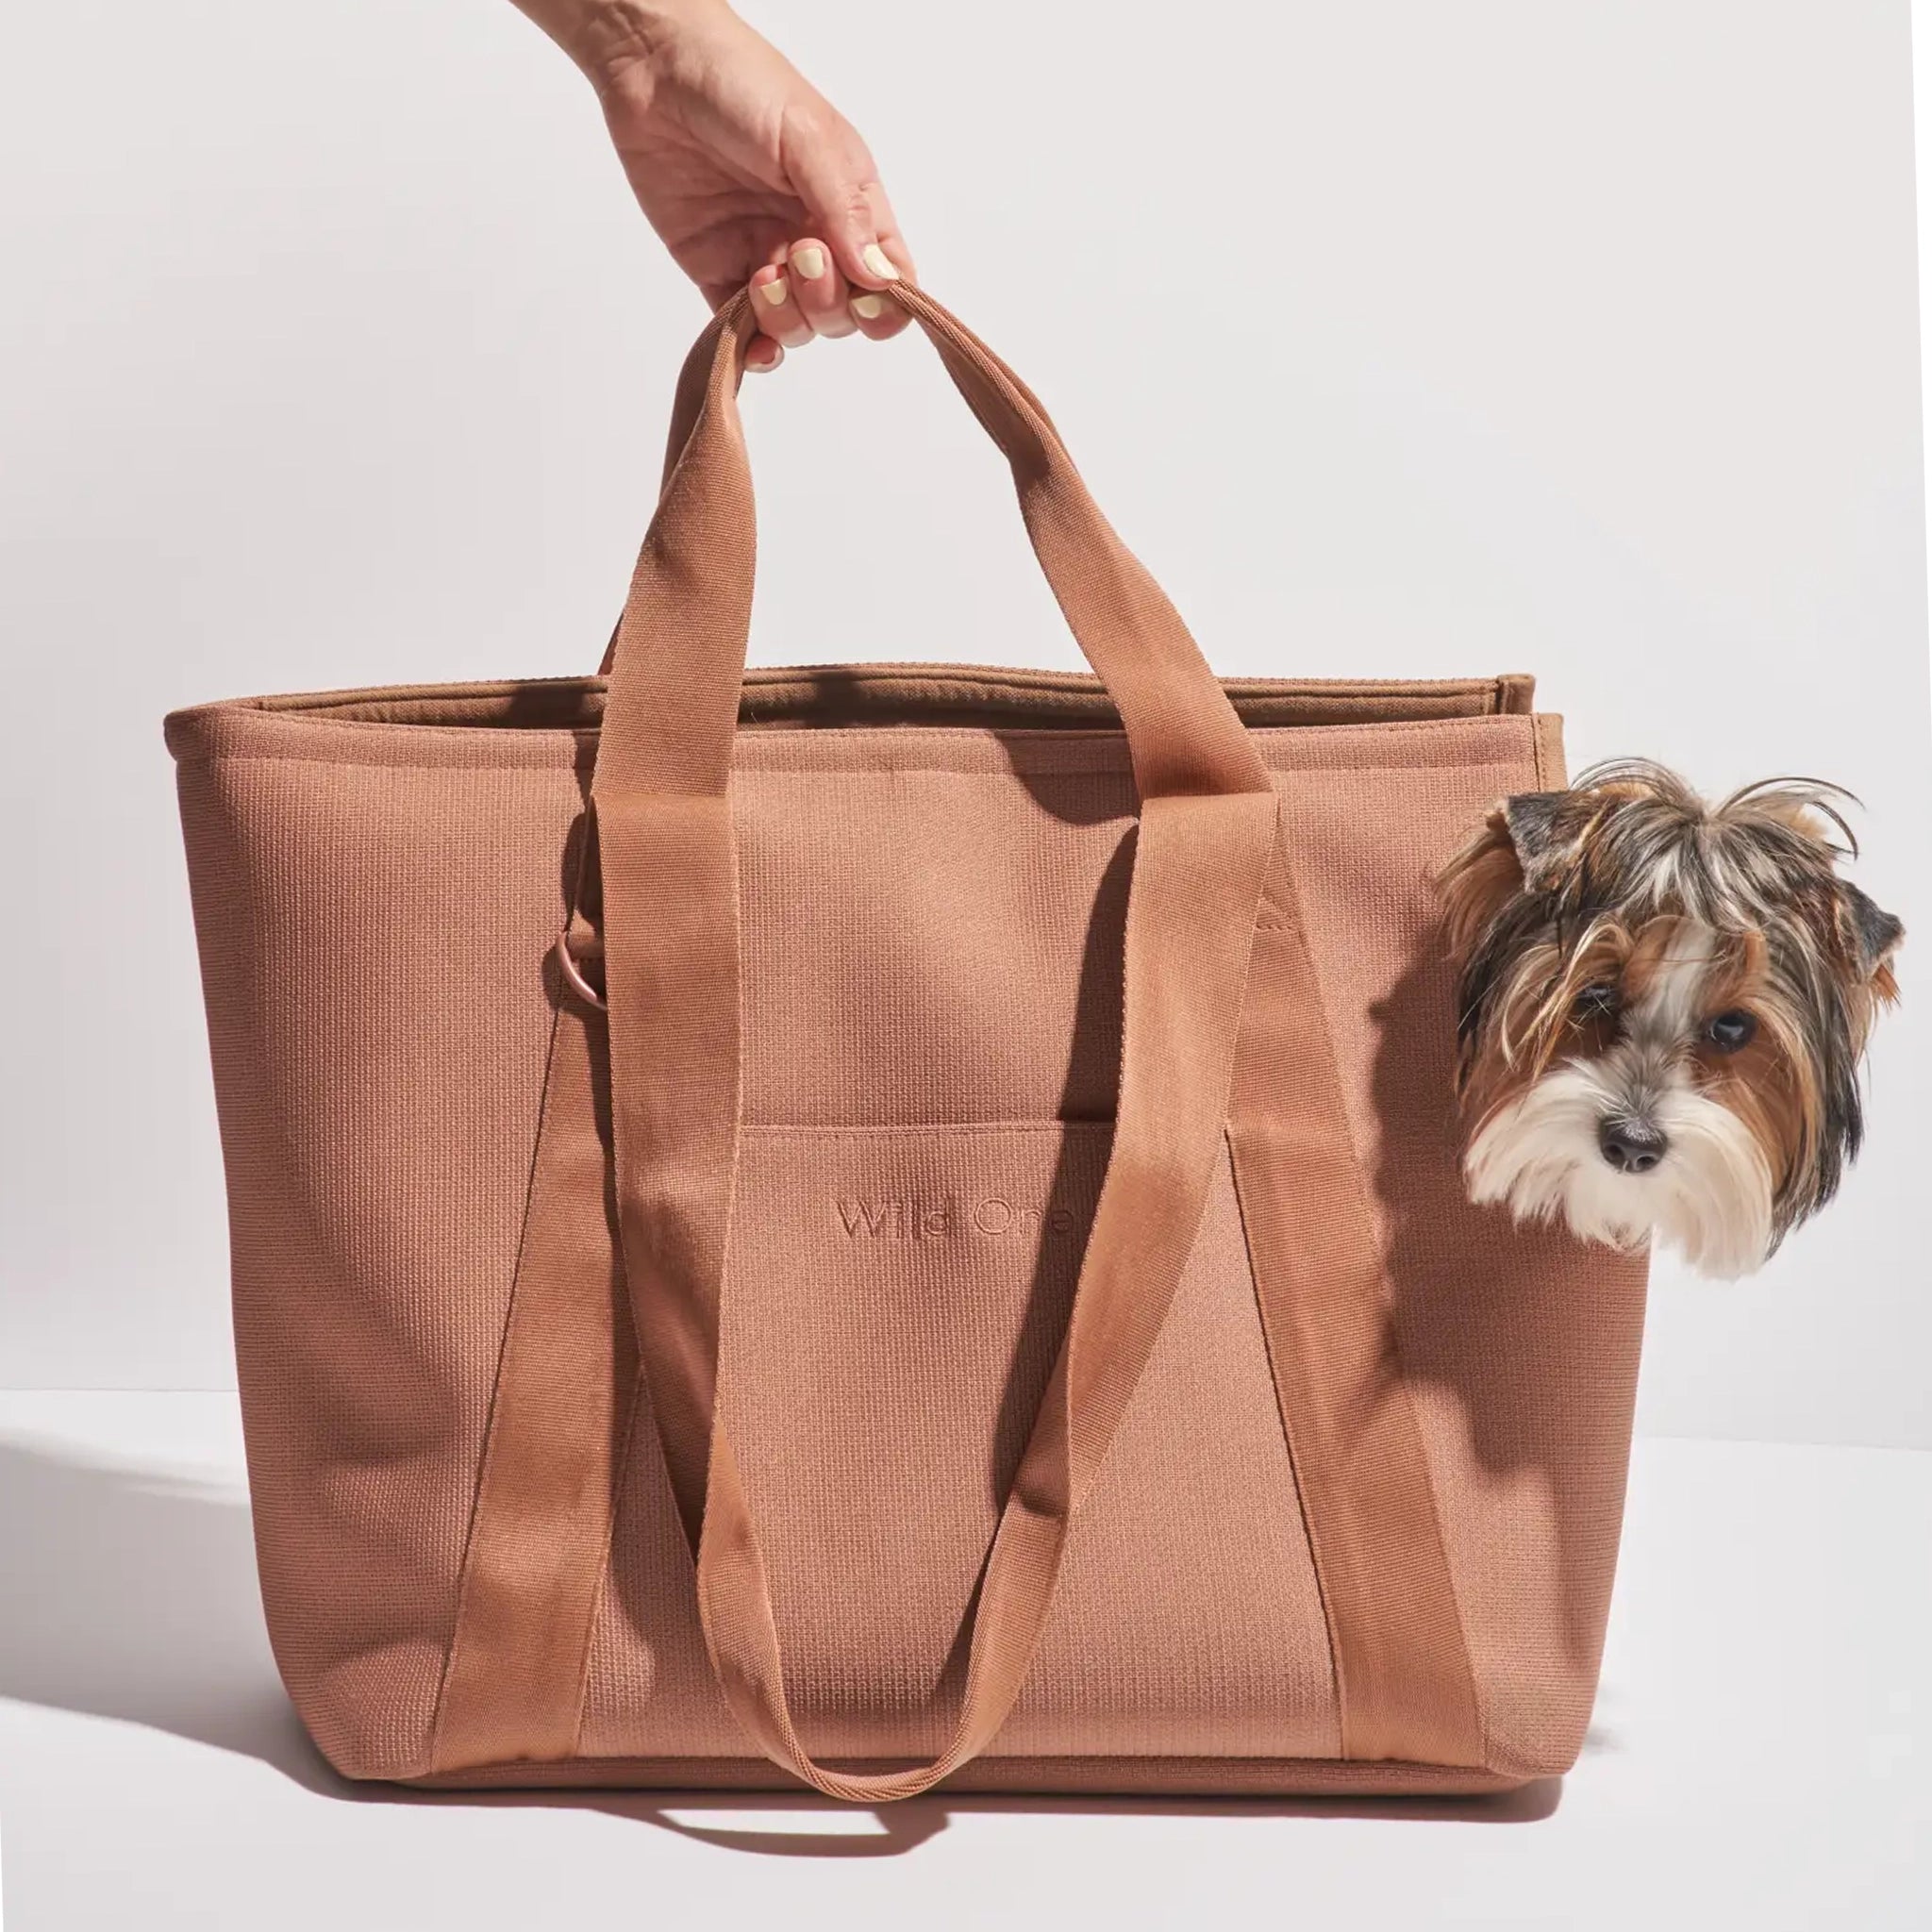 On a white background is a brownish/tan pet carrier tote with a spot for the pet's head to poke out and two straps. 